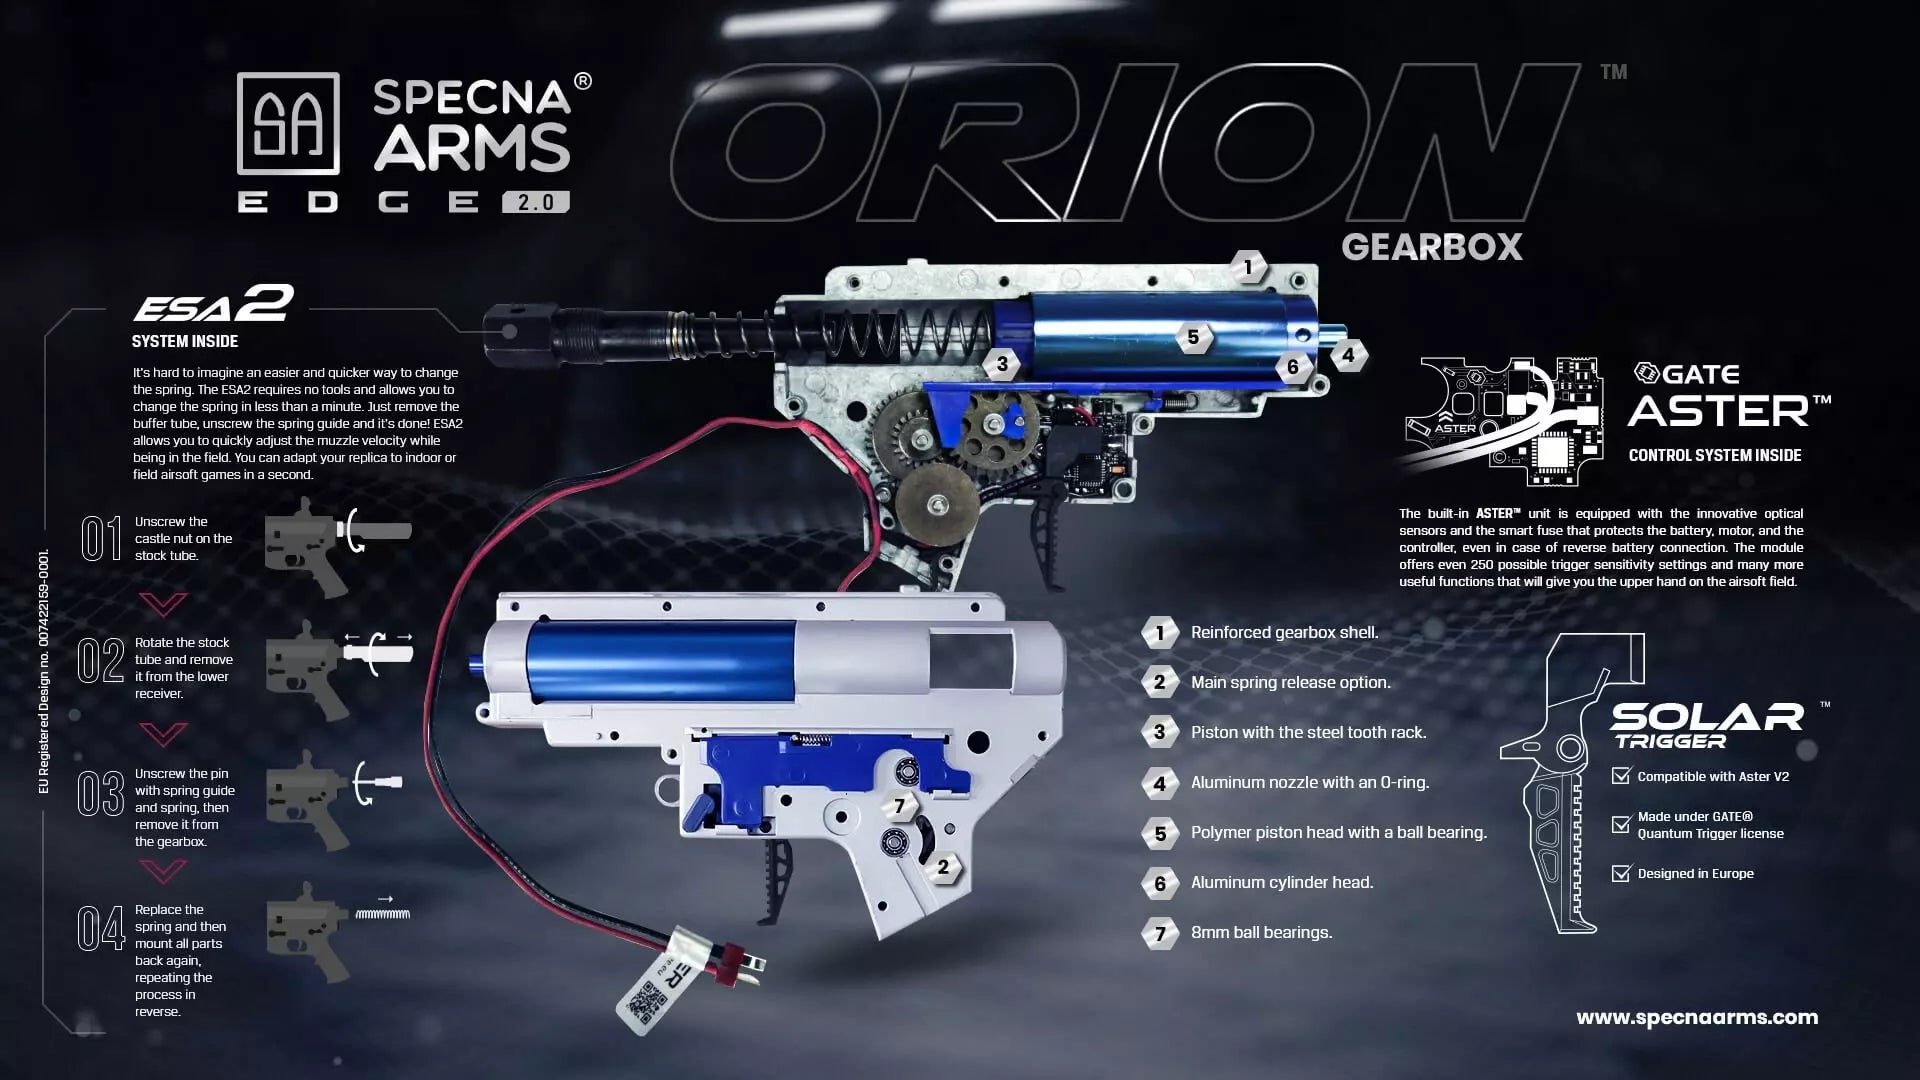 Specna Arms ORION gearbox